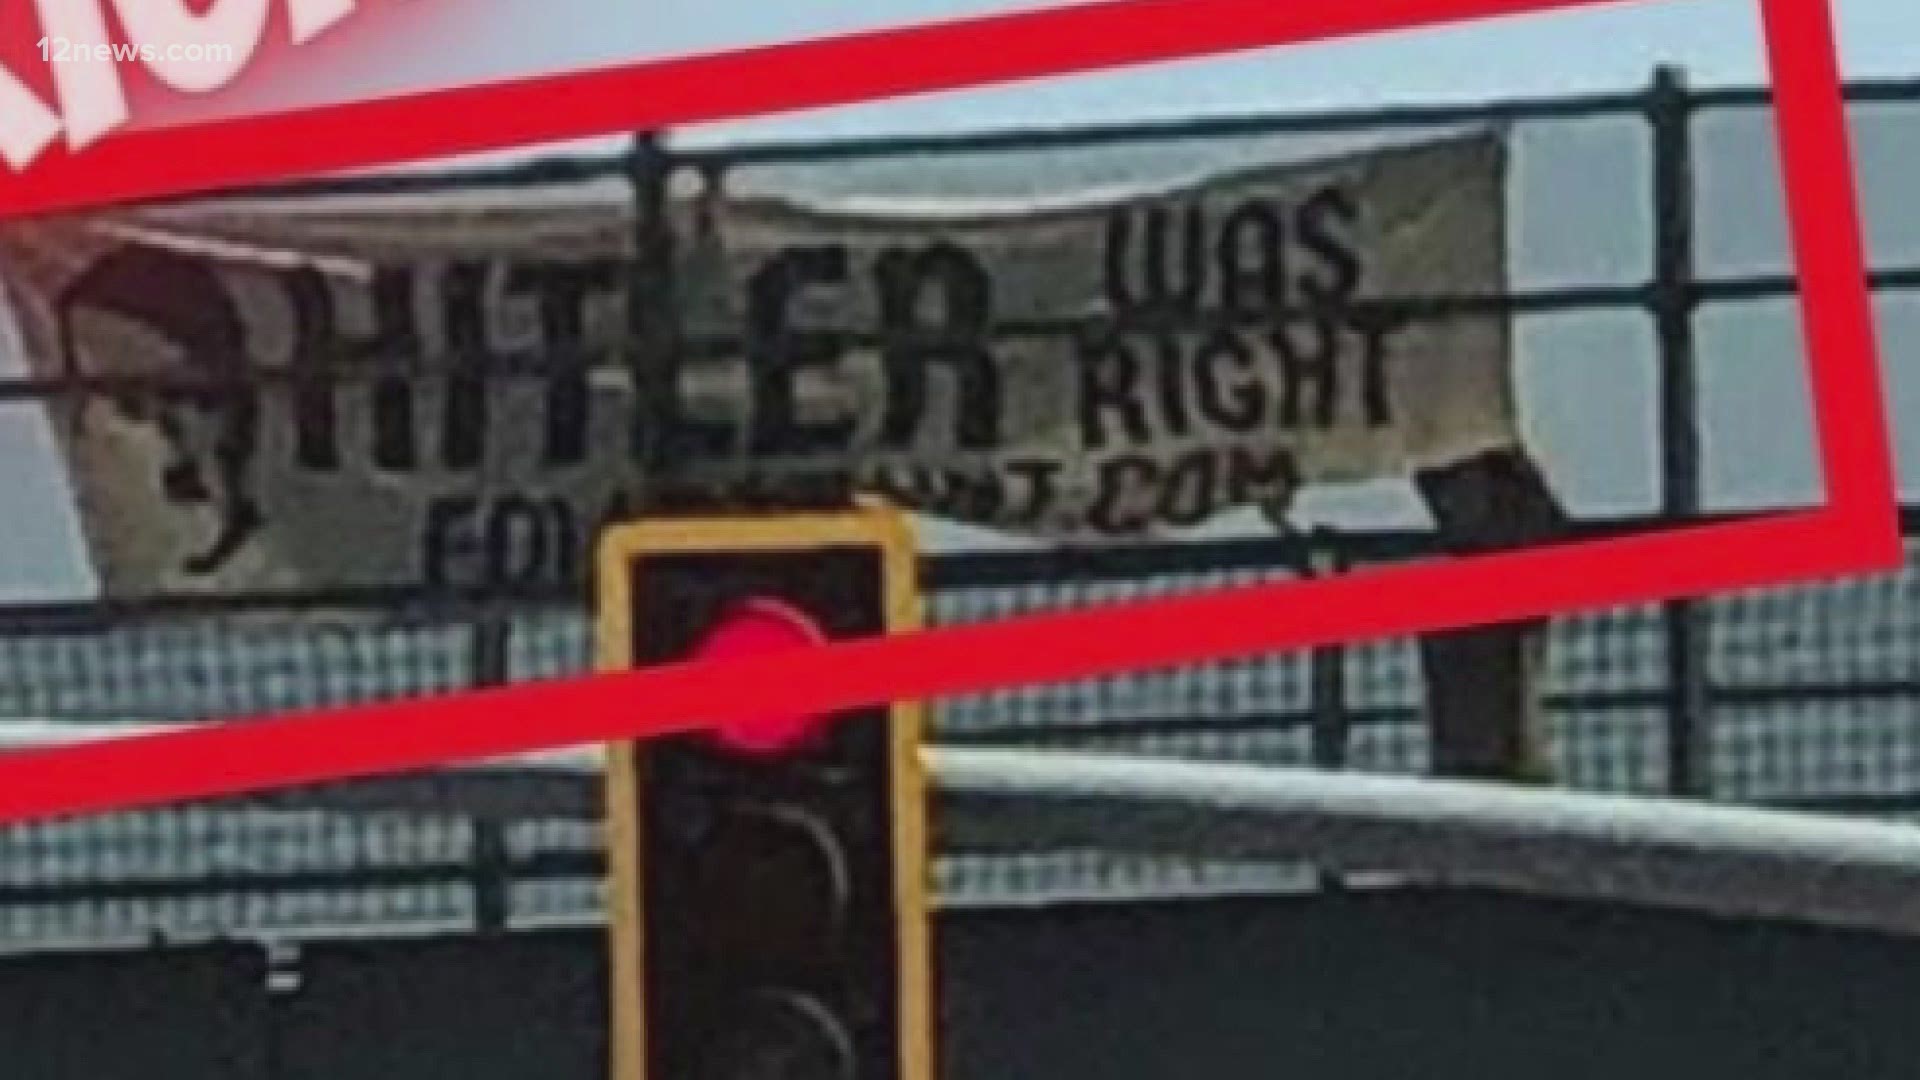 Four men were arrested over the weekend for trespassing on a railroad bridge in Queen Creek. They were caught taking photos and posing with a banner praising Hitler.